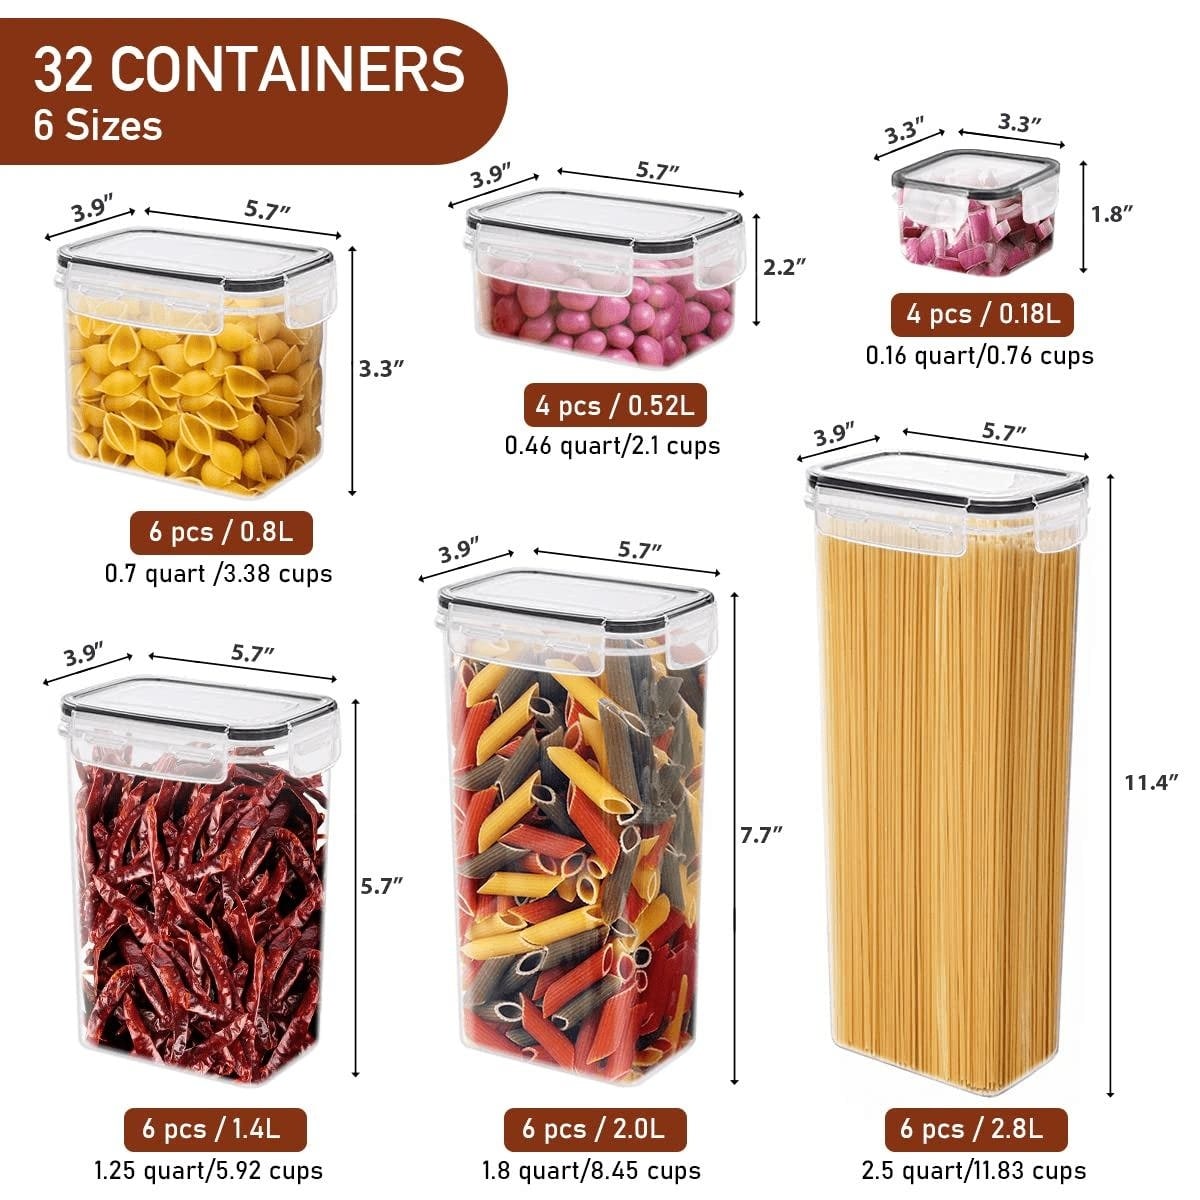 https://ak1.ostkcdn.com/images/products/is/images/direct/70d729bd328837ea53c23d90a5175c0b79c3fa85/32-piece-food-storage-container.jpg